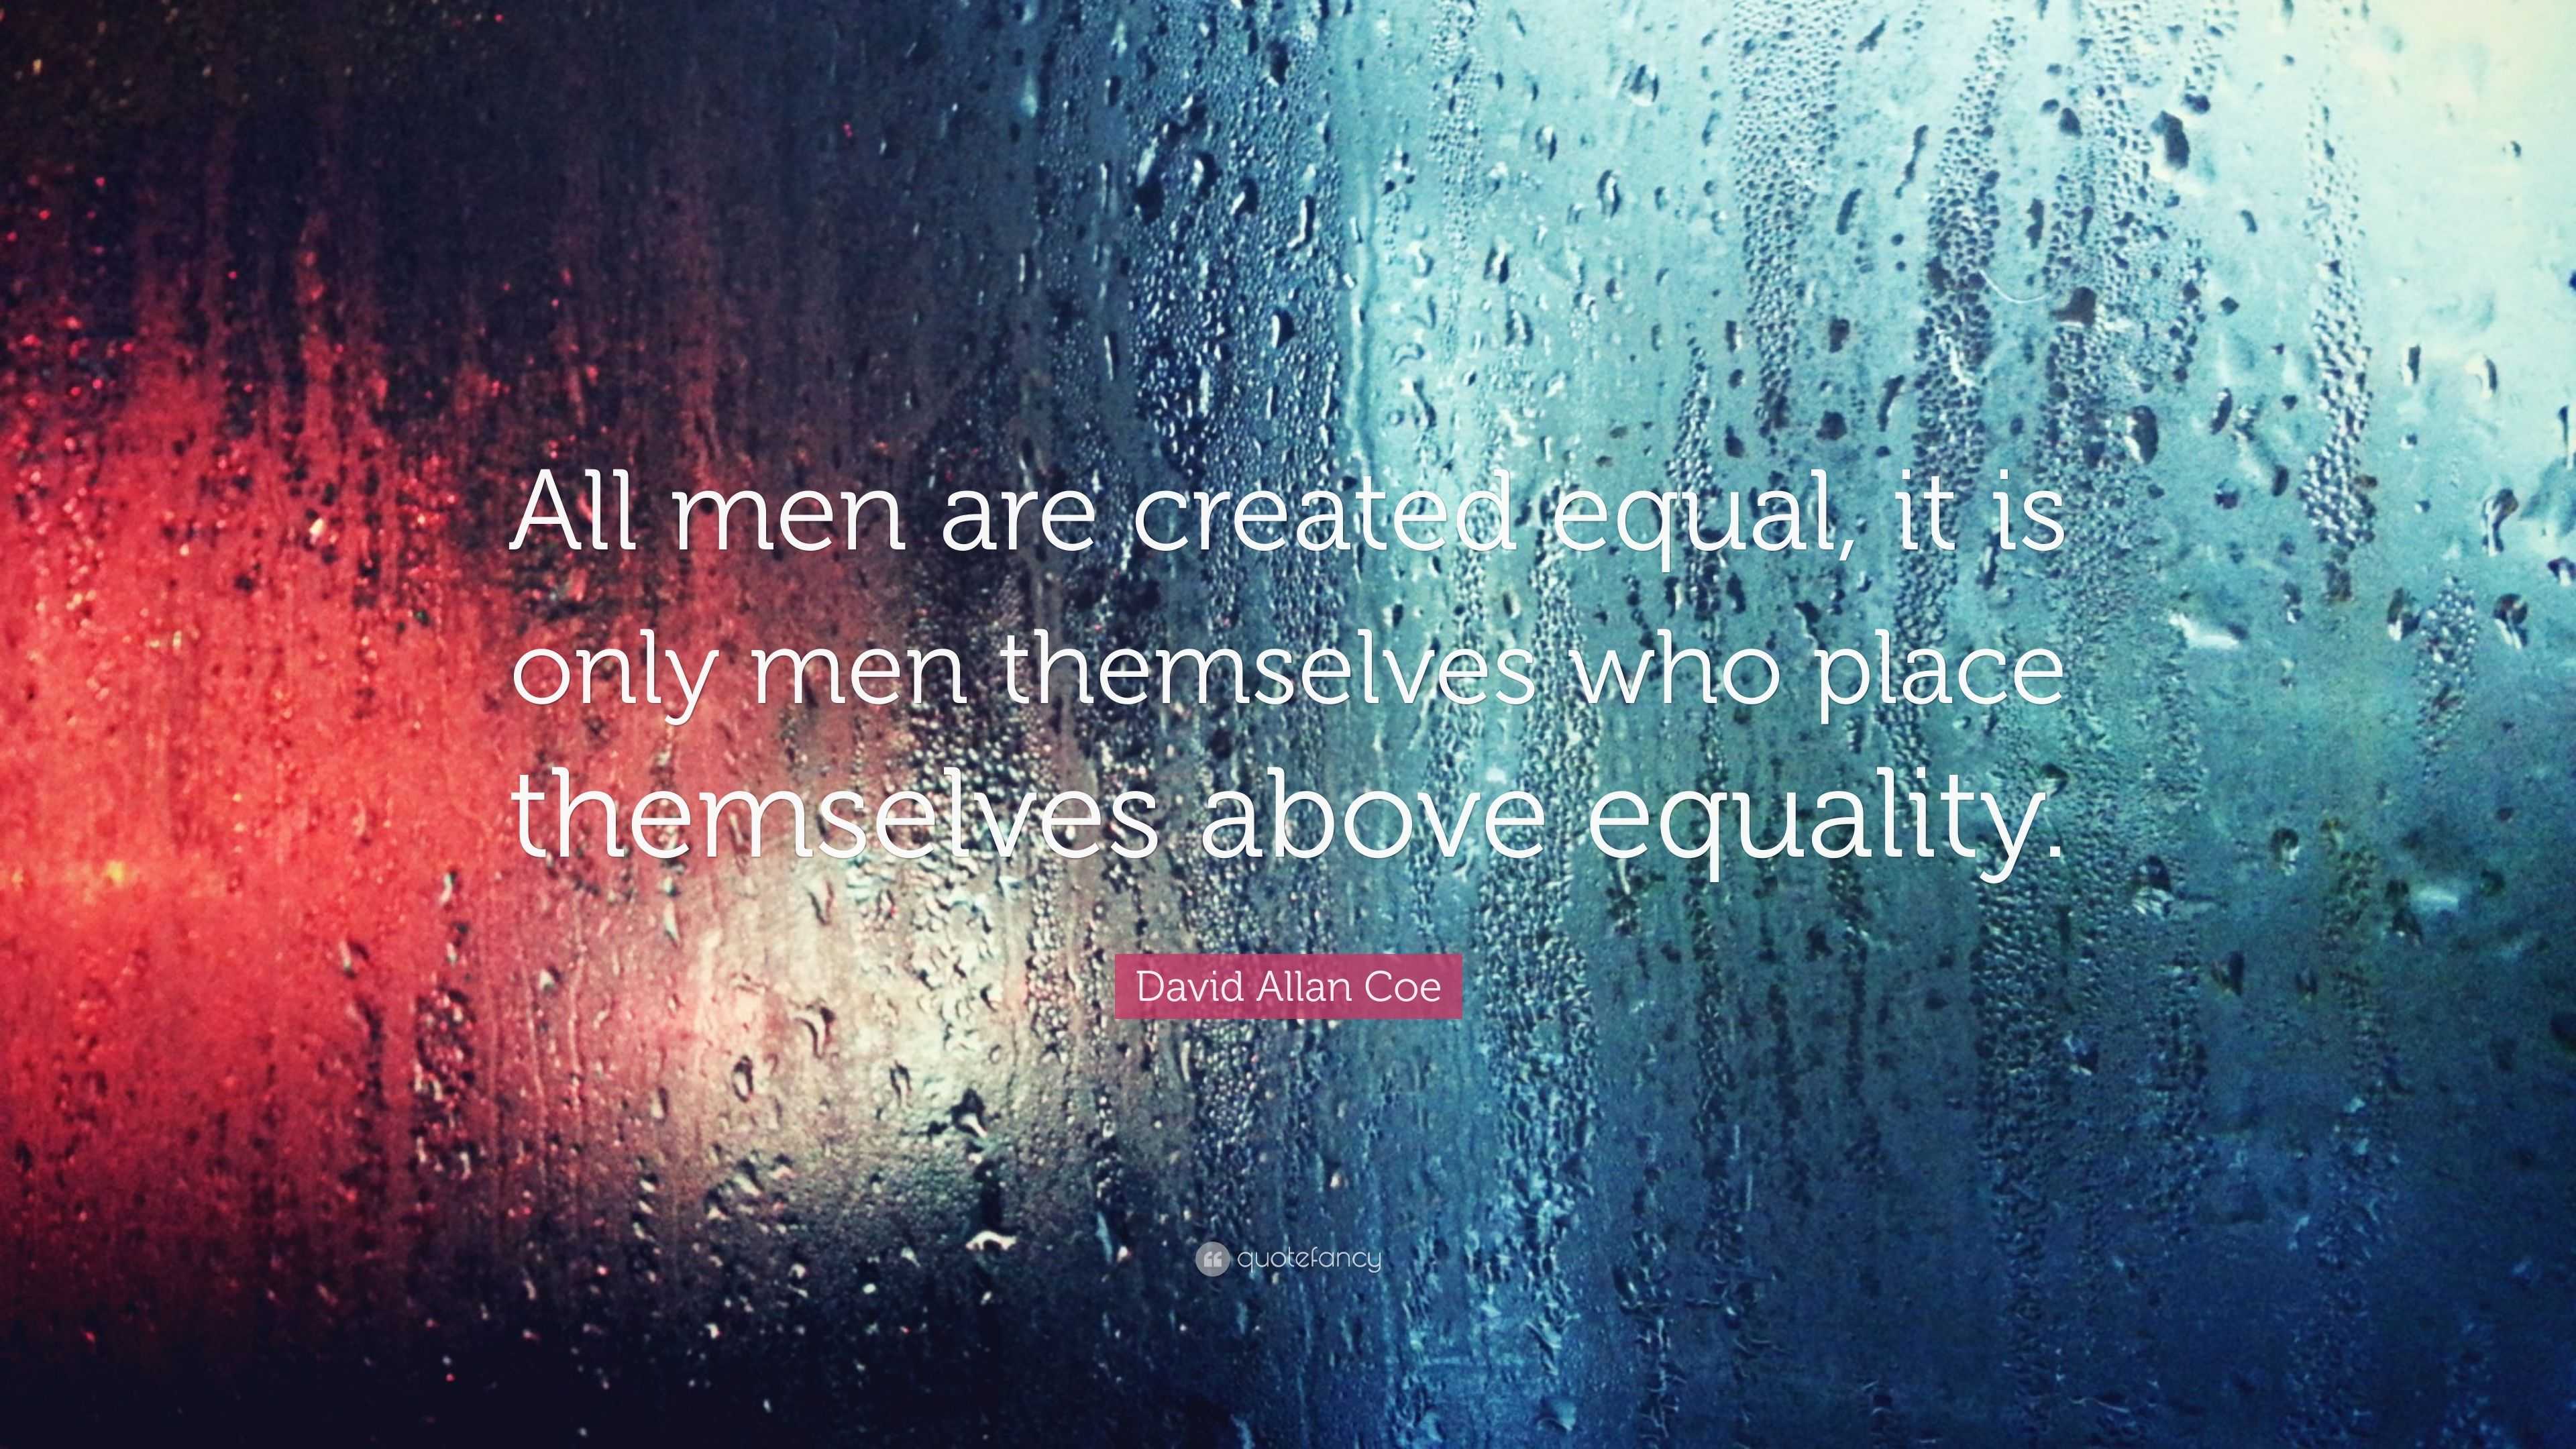 David Allan Coe Quote: “All men are created equal, it is only men